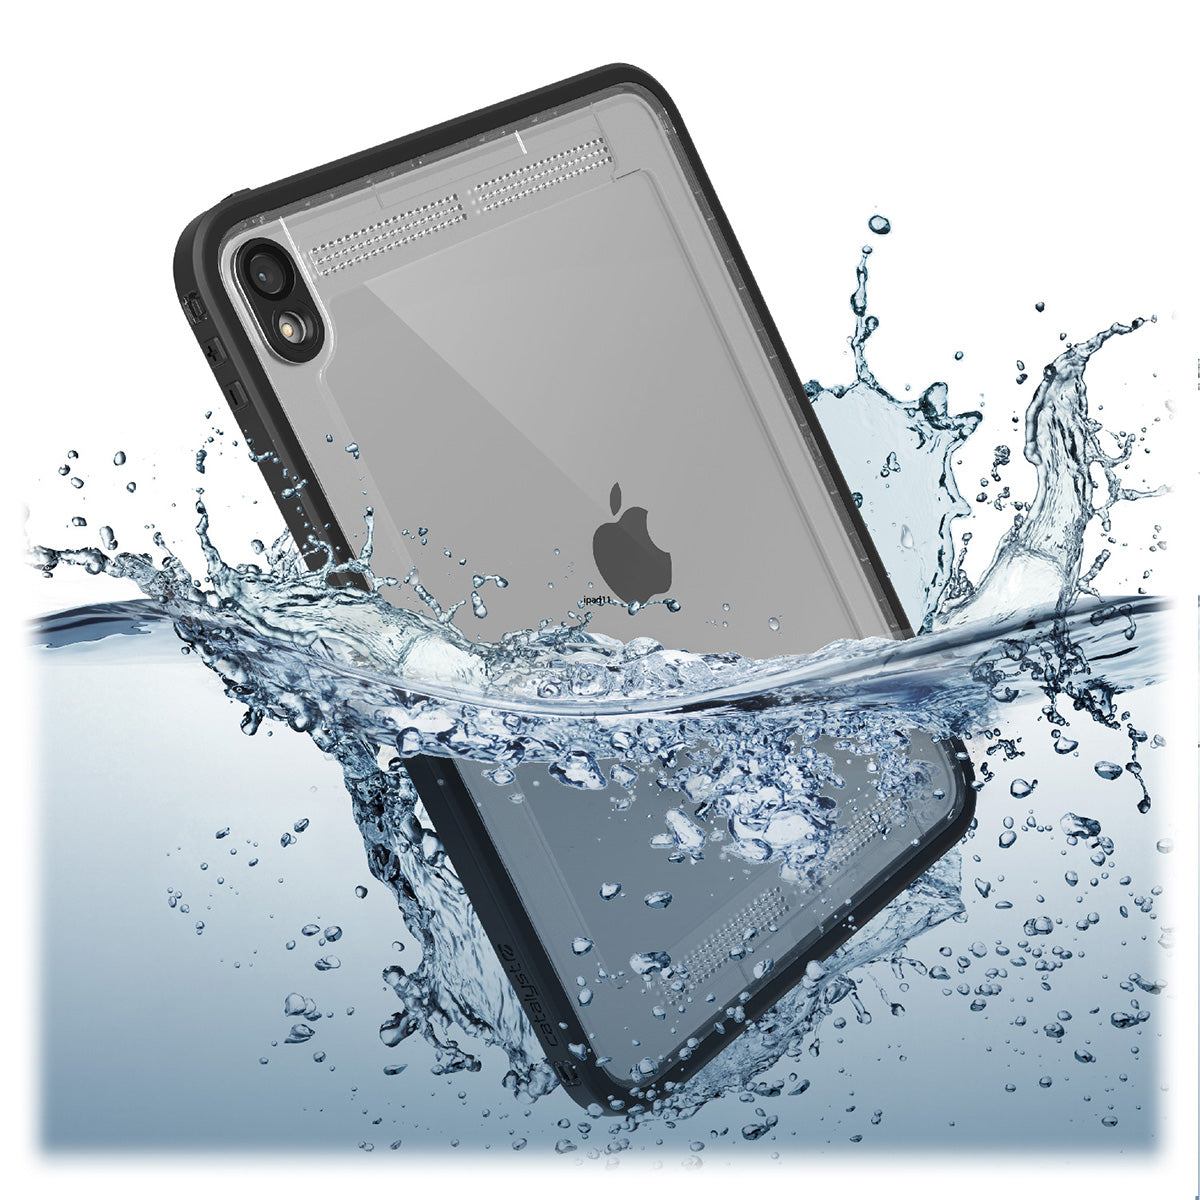 Catalyst iPad Pro (Gen 1), 11" - Waterproof Case showing the case submerged in the water